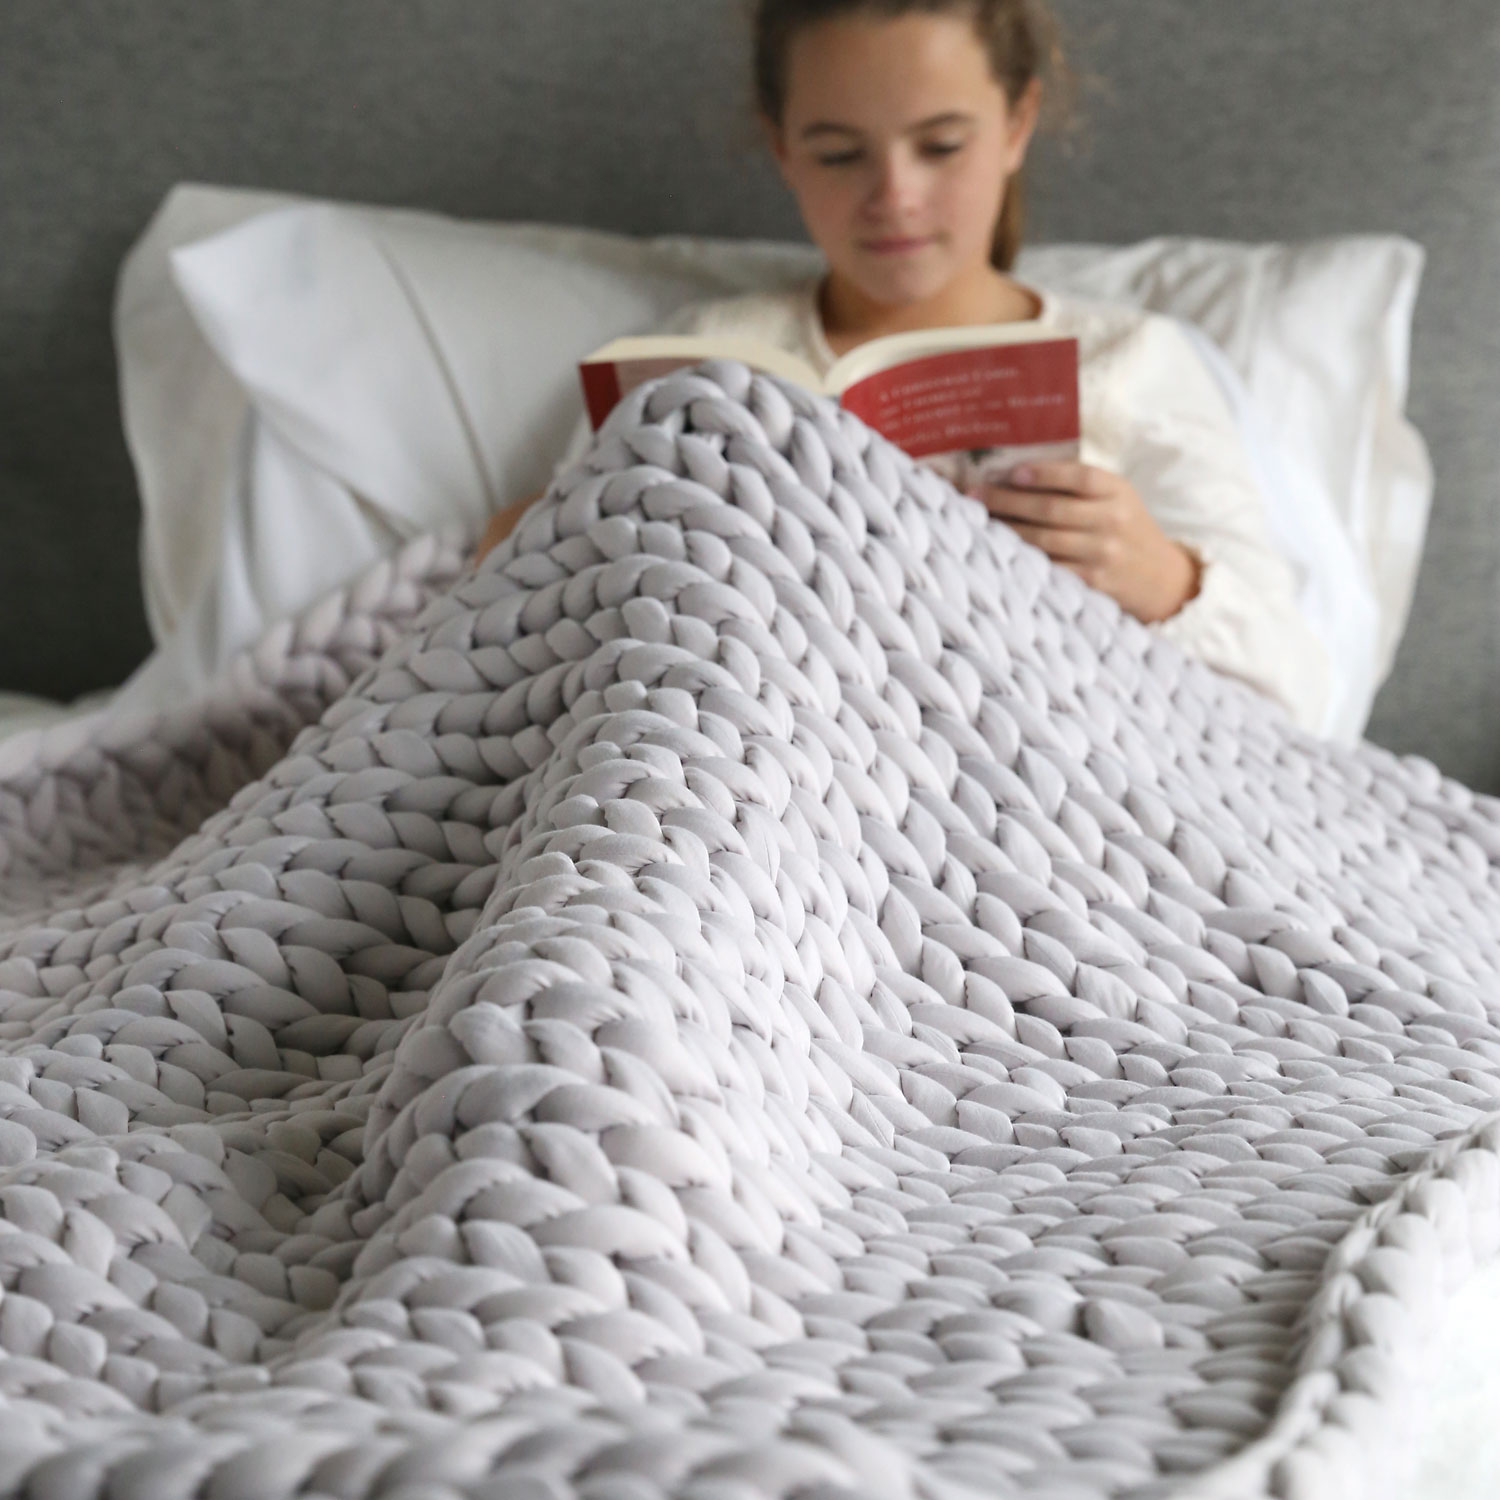 Chunky Knit Chenille Blanket: Warmth and Comfort – Wool Art